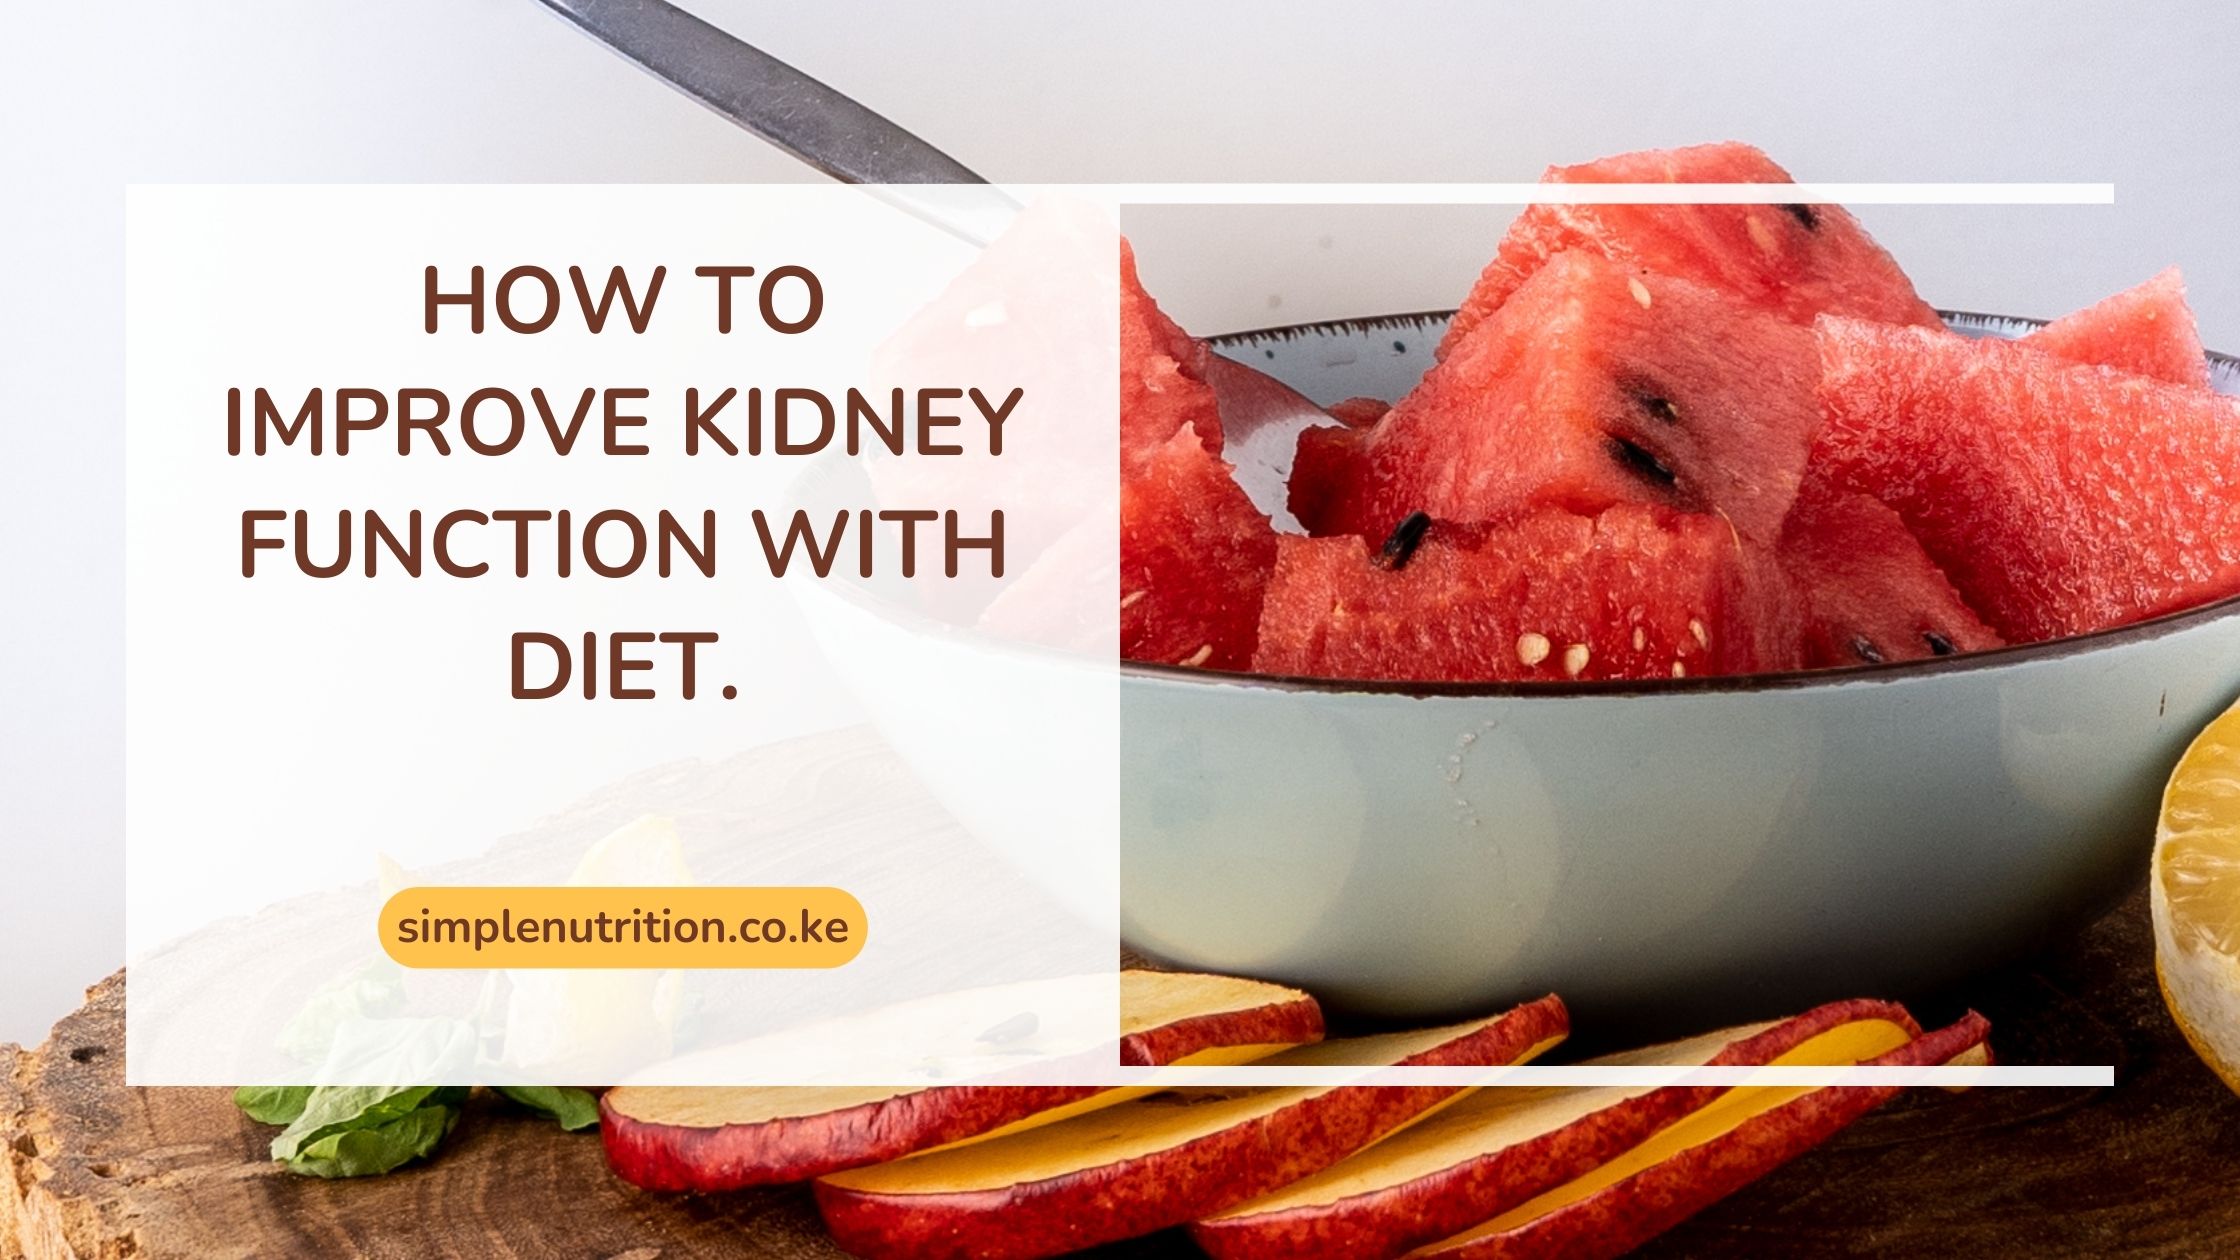 How to Improve Kidney Function with diet.